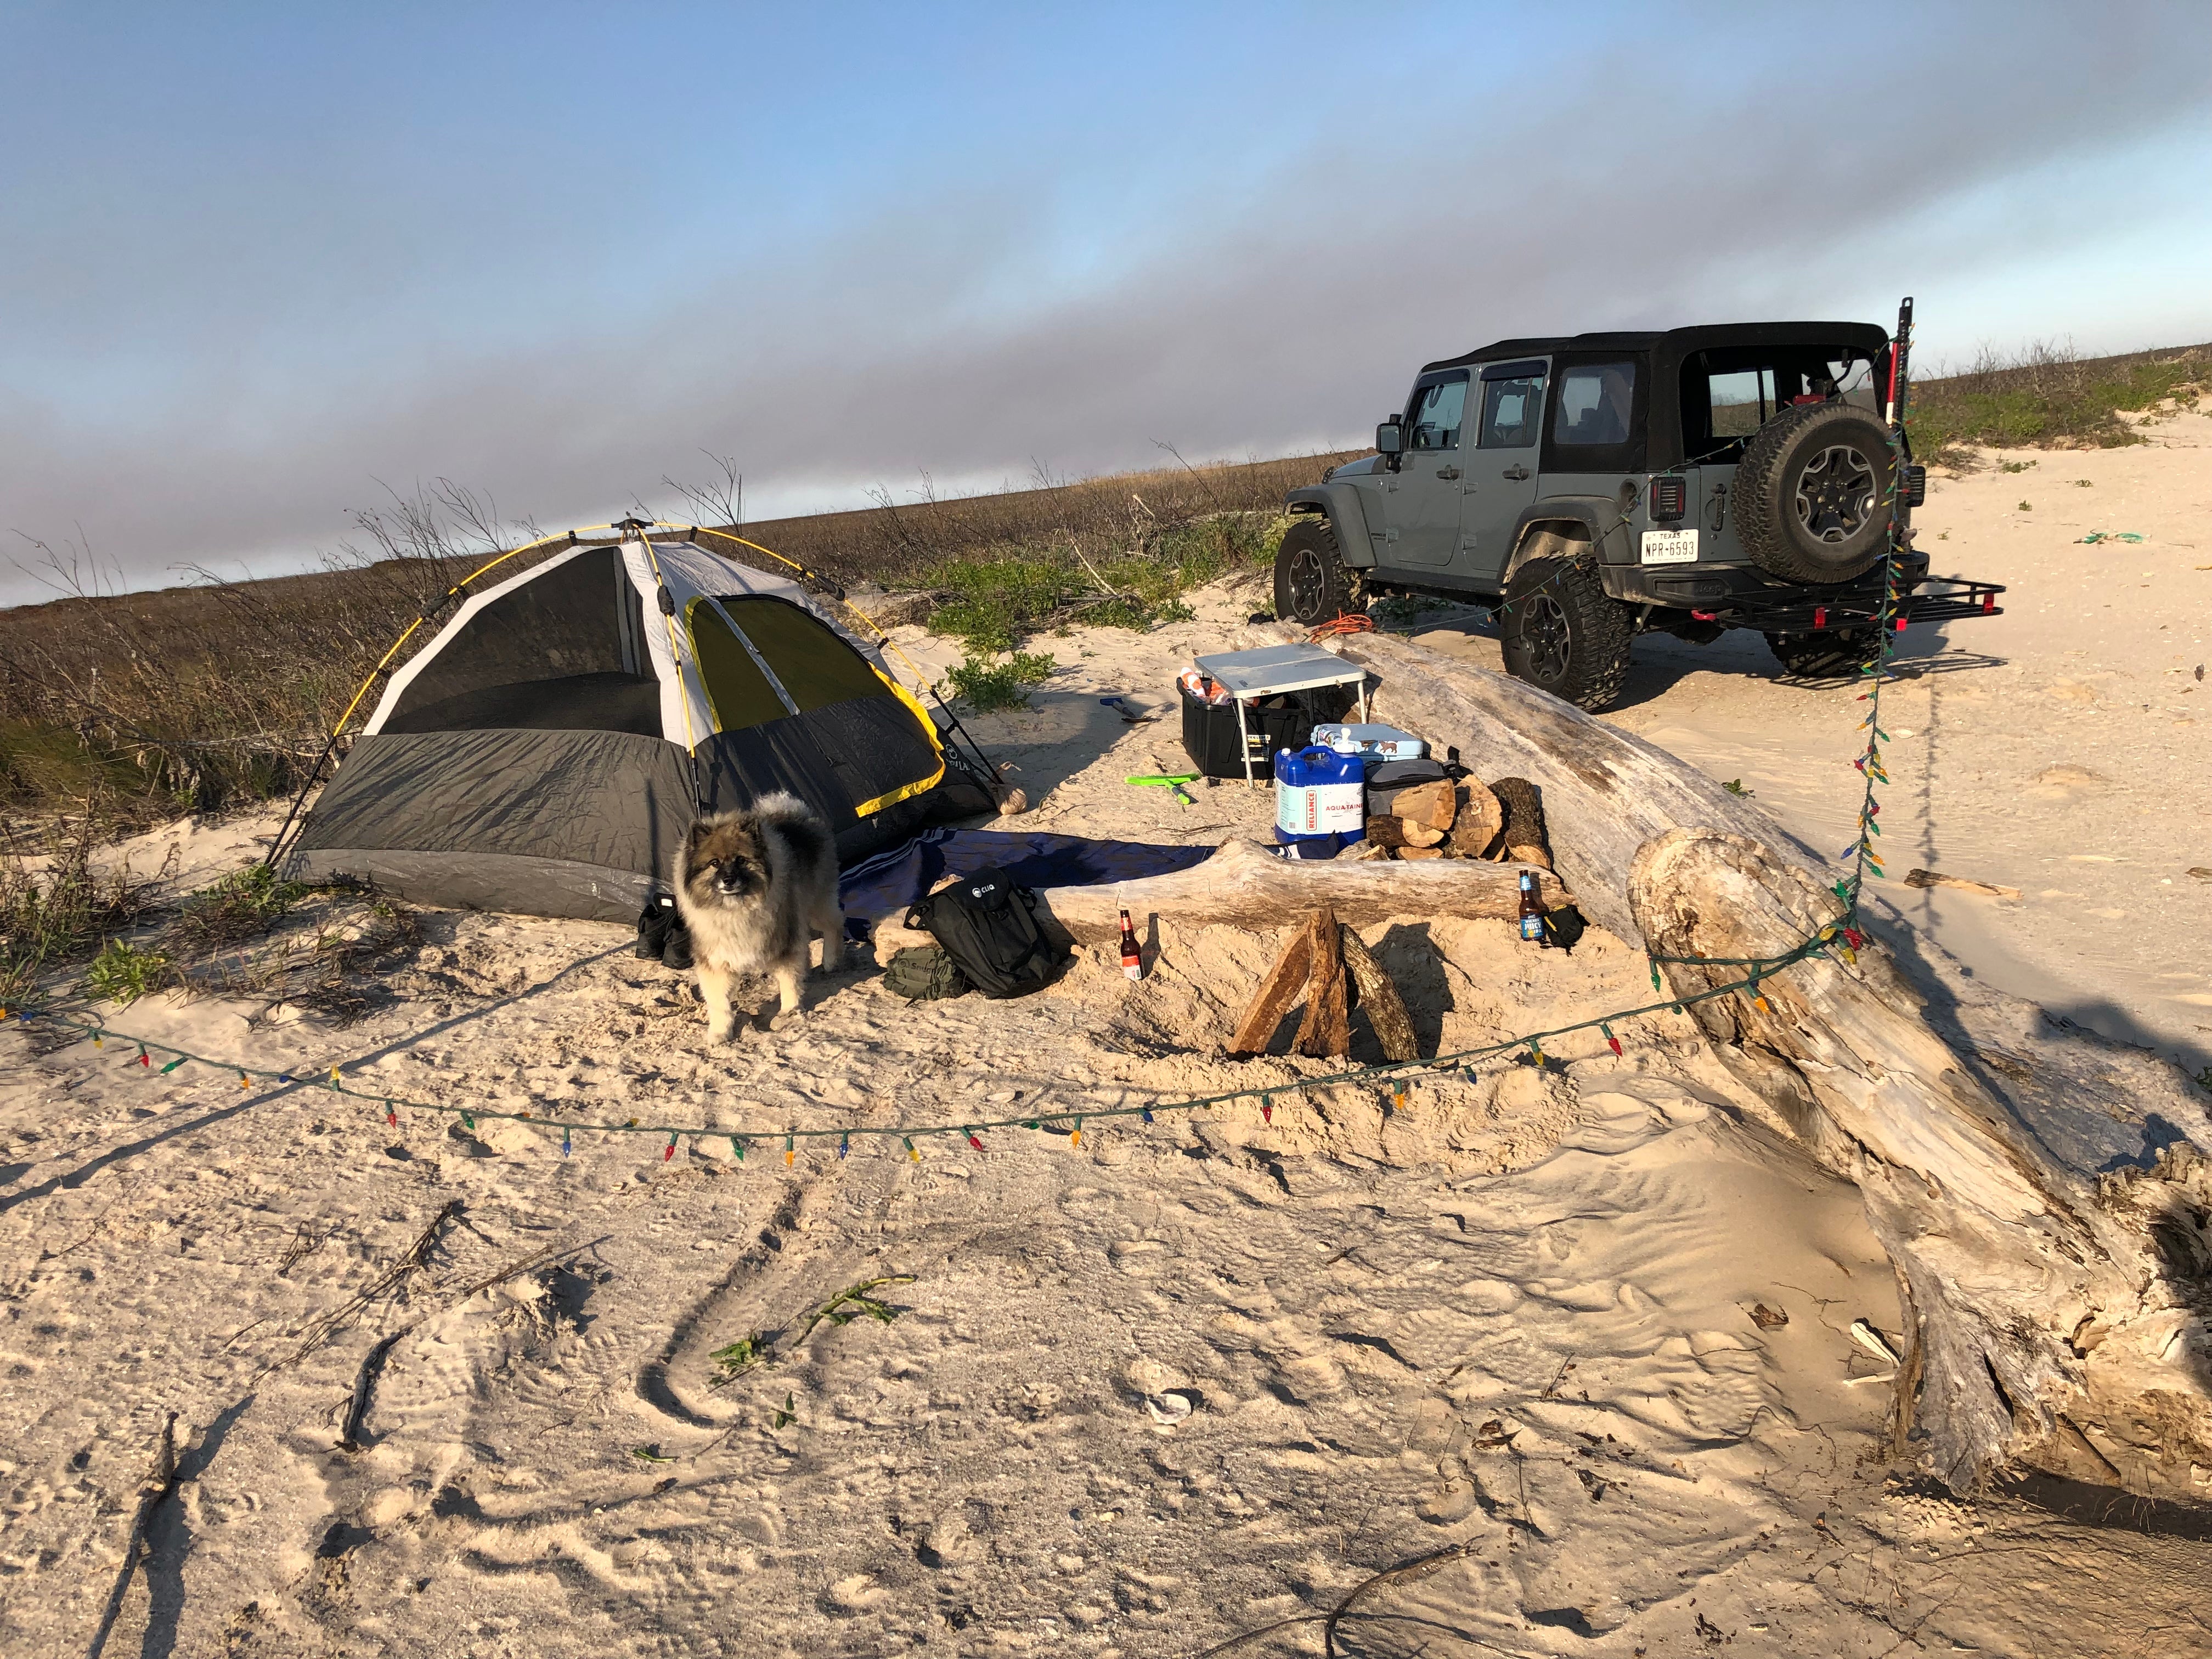 Camper submitted image from Matagorda Beach Dispersed Camping - 1